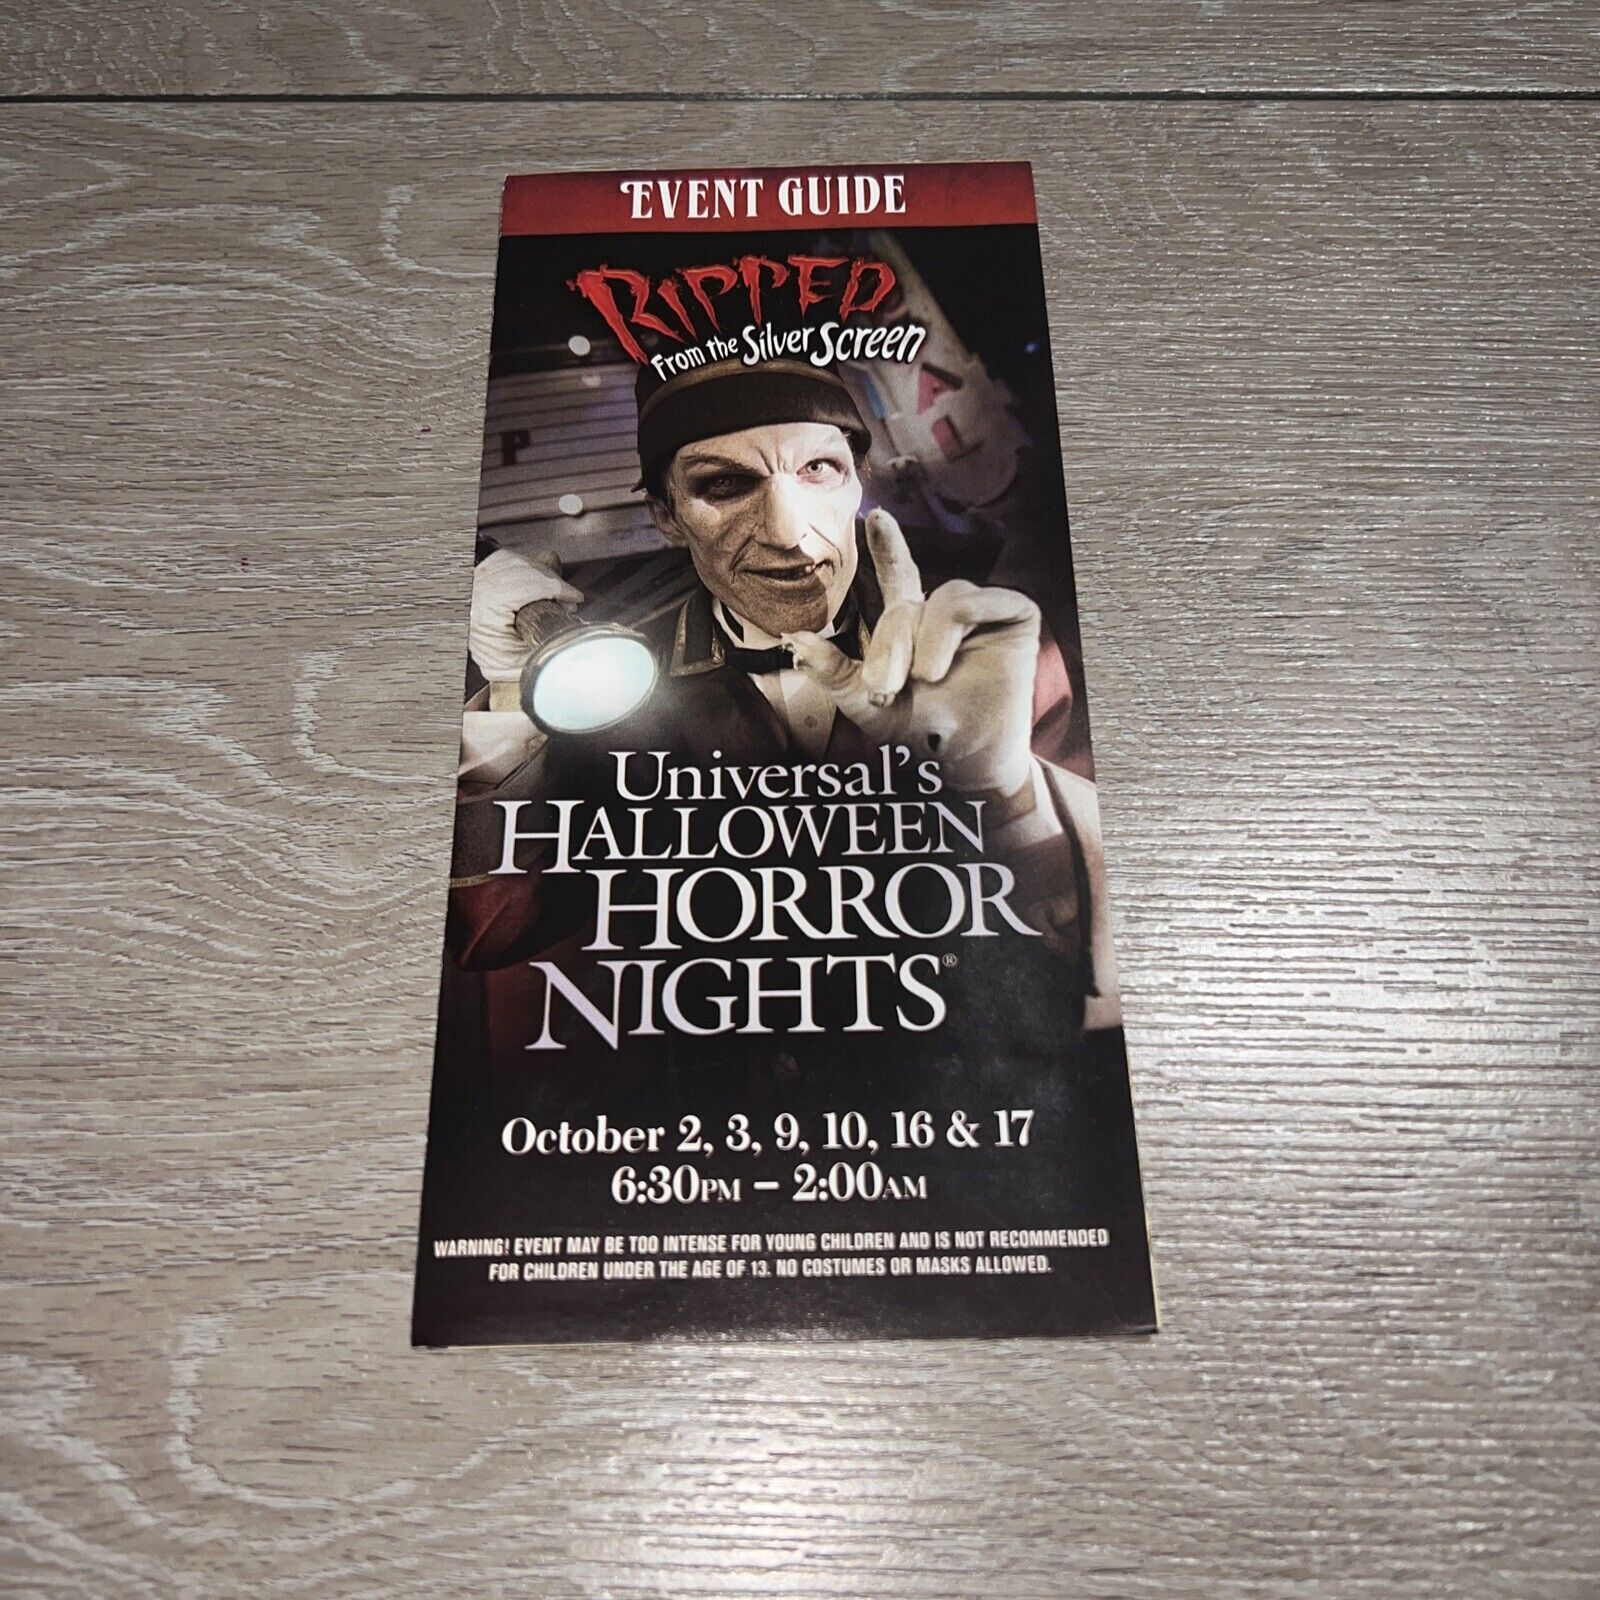 Halloween Horror Nights 19 Ripped From  Silver Screen Event Guide Map 2009 USHER